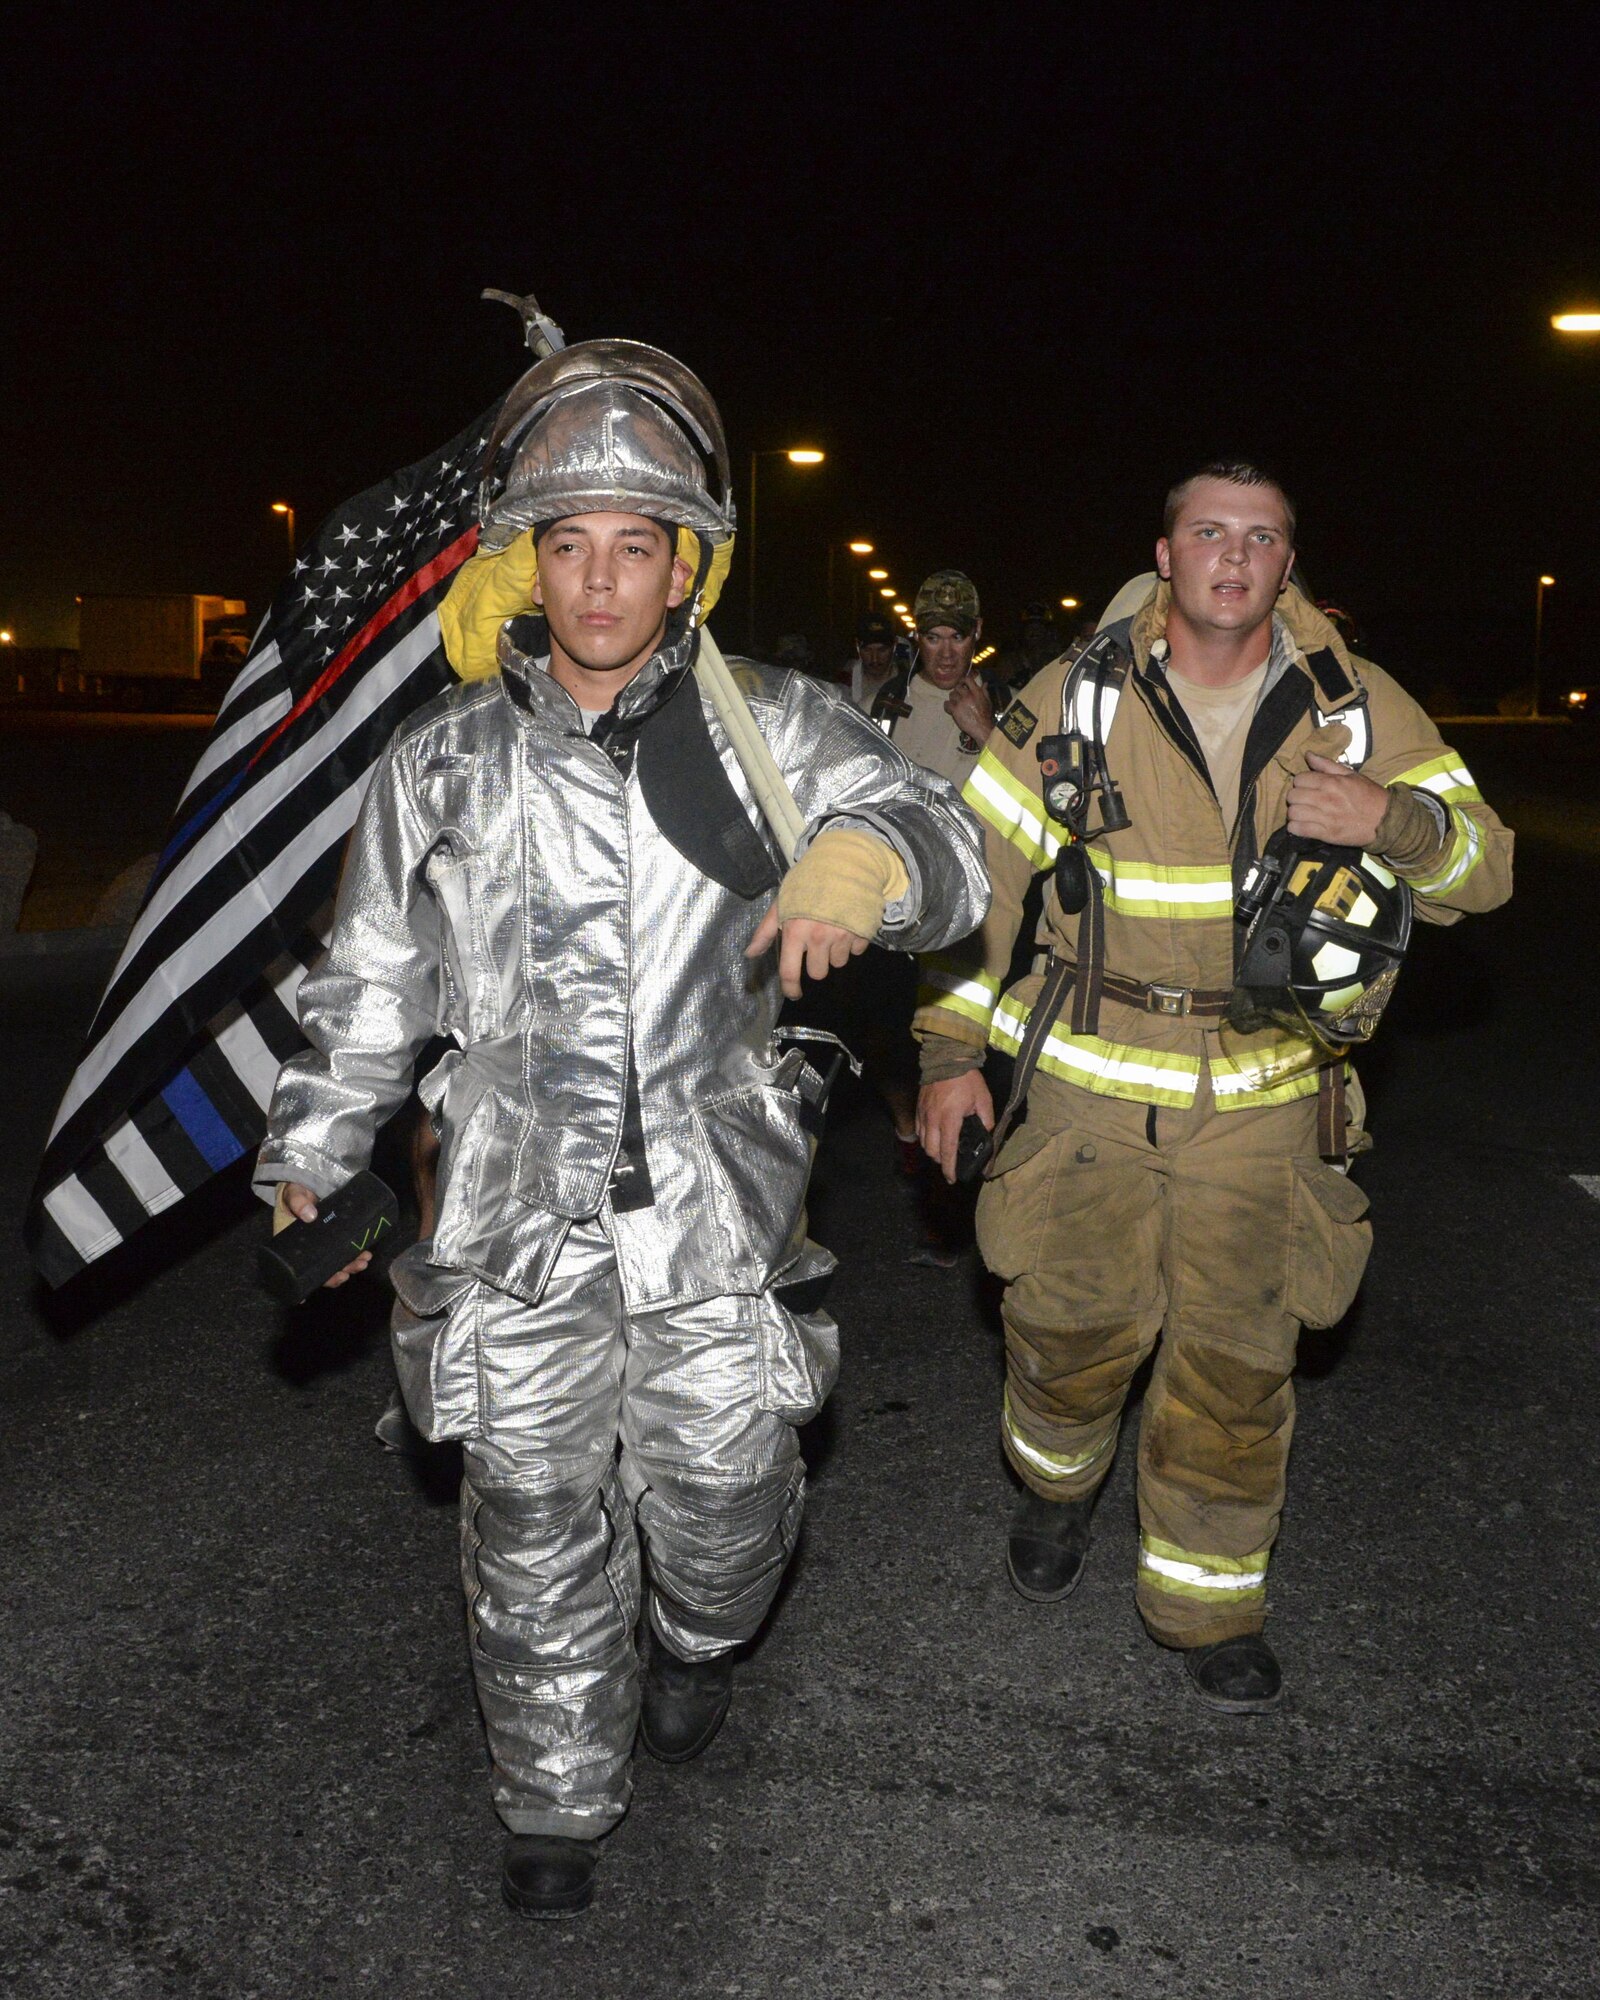 U.S. Air Force Senior Airmen Mario Jaquez, left, and Matthew Brooks, firefighters assigned to the 379th Expeditionary Civil Engineering Squadron, participate in an evening 9/11 memorial walk at Al Udeid Air Base, Qatar, Sept. 11, 2017.